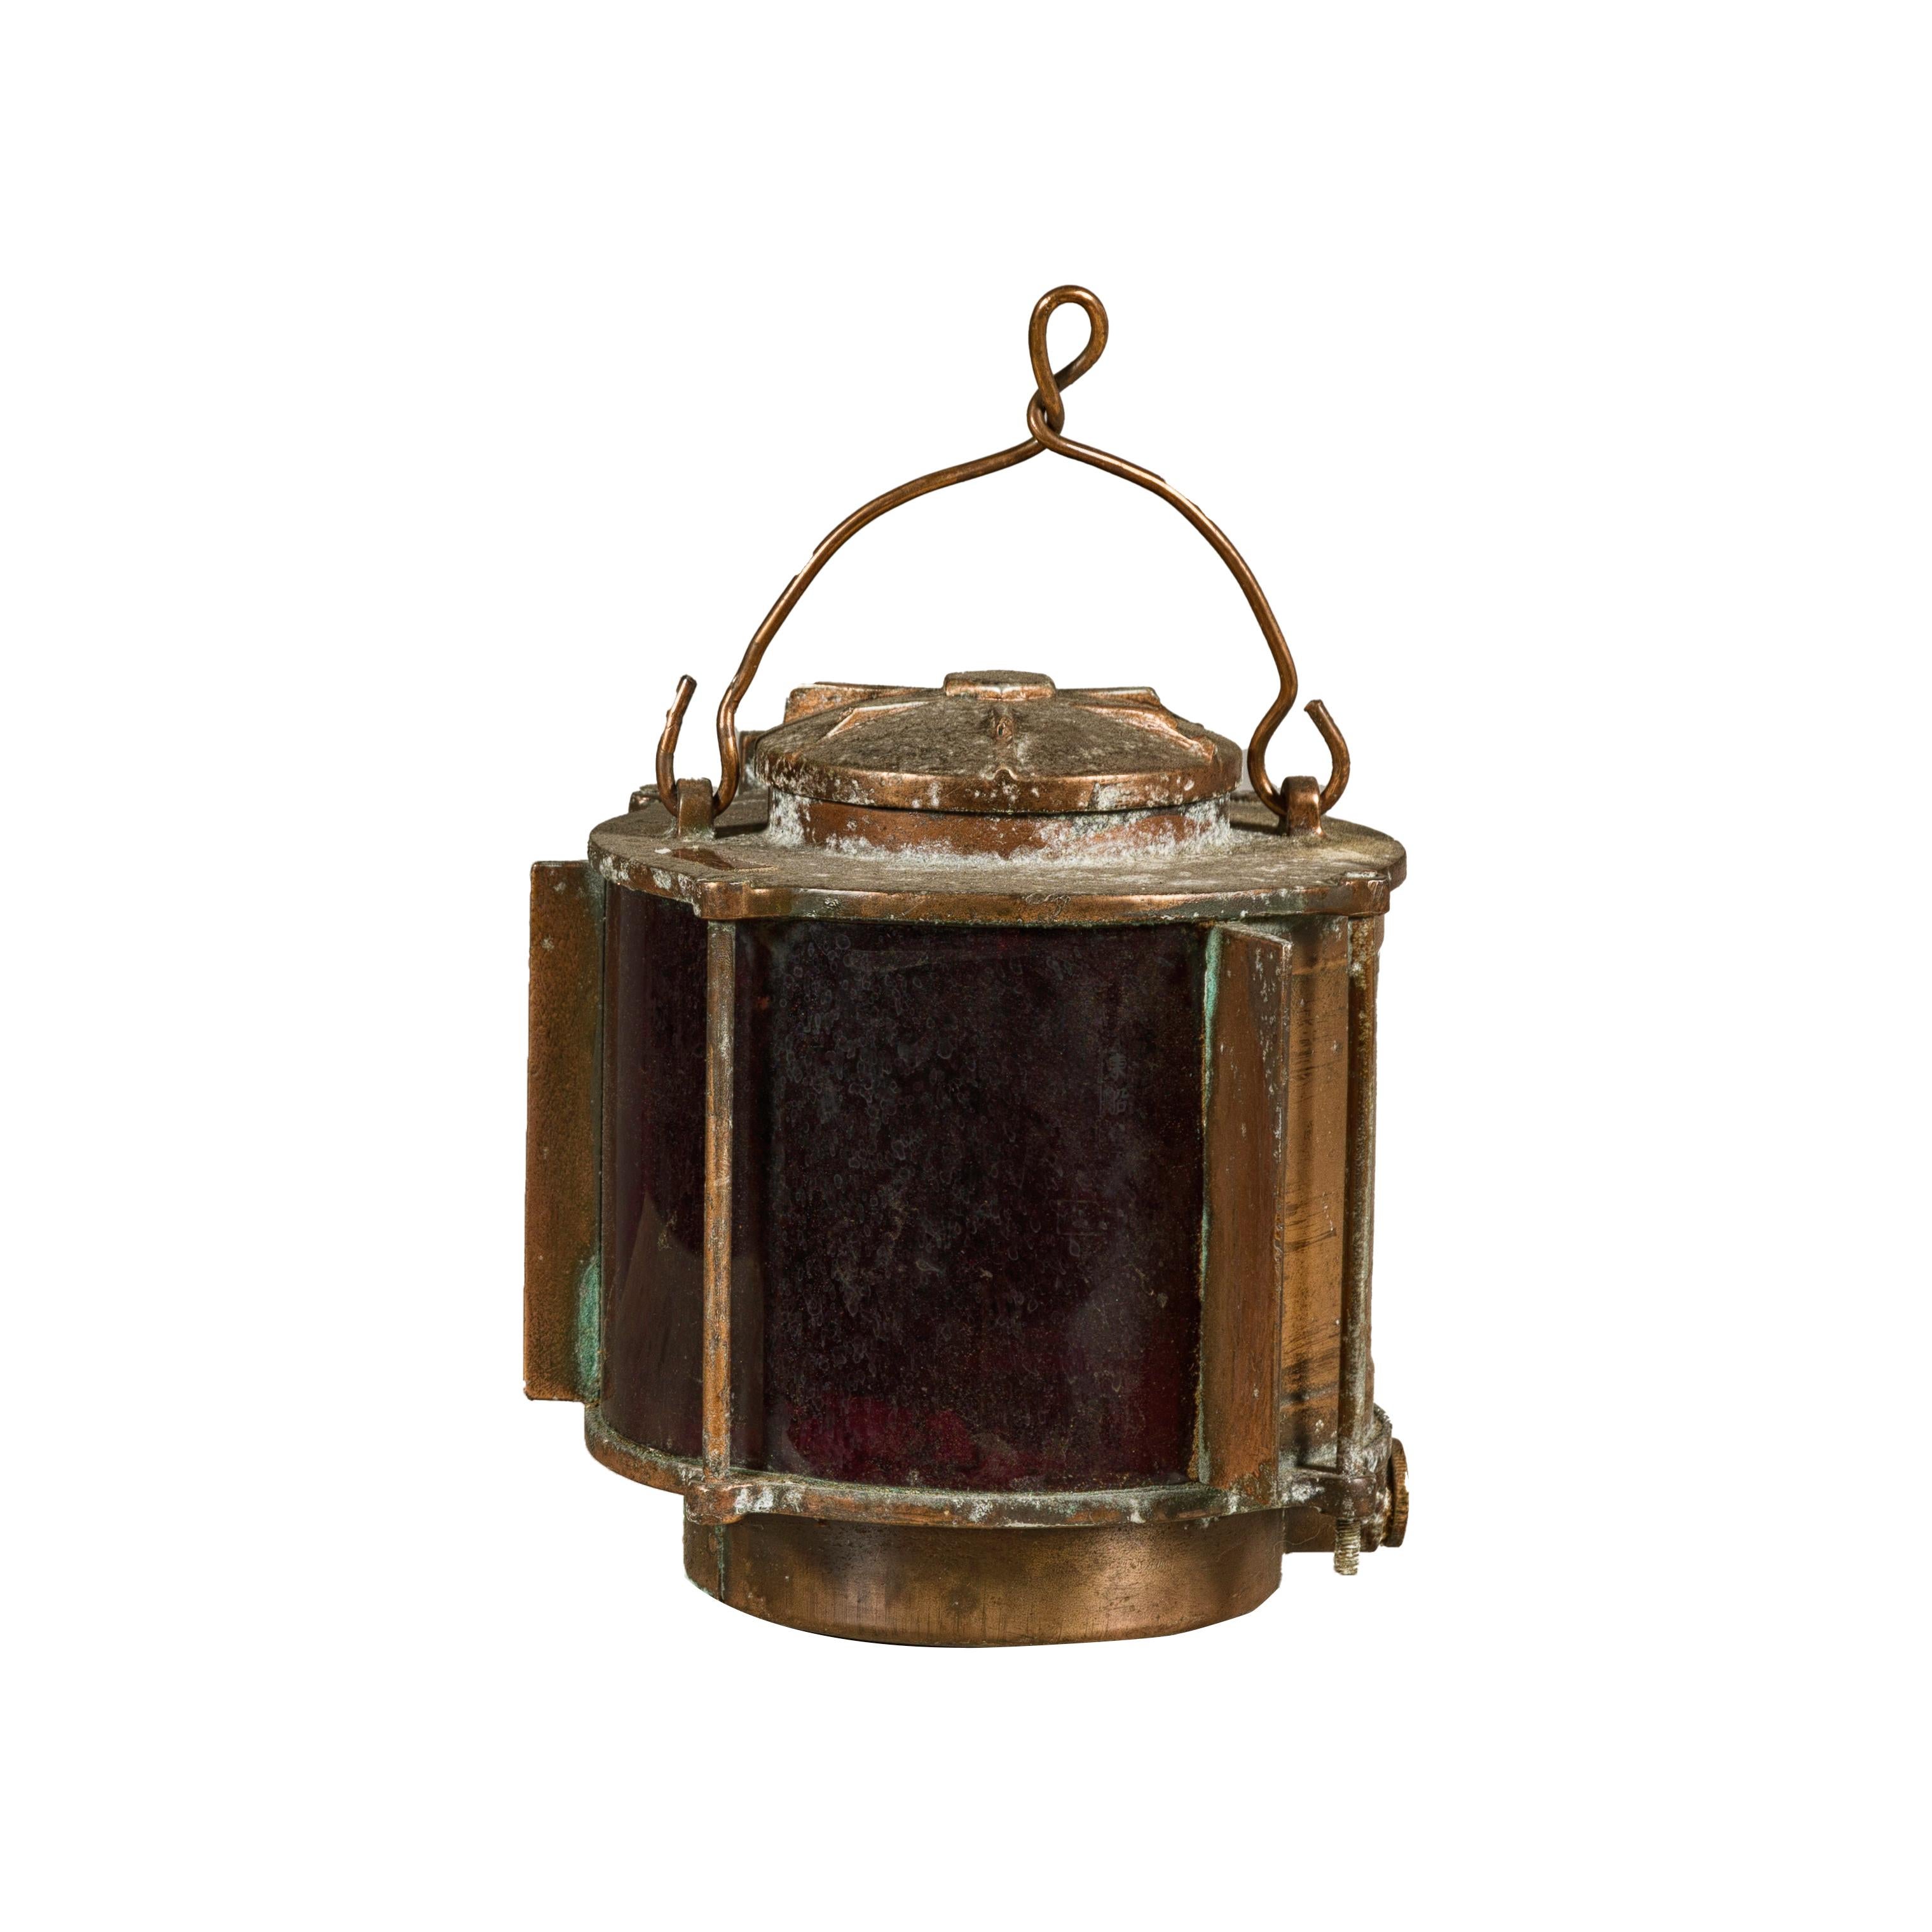 A vintage Japanese metal stern light ship lantern from the mid 20th century with handle and glass panels, inwired. This vintage Japanese stern light ship lantern, originating from the mid-20th century, embodies the robust spirit of maritime history.